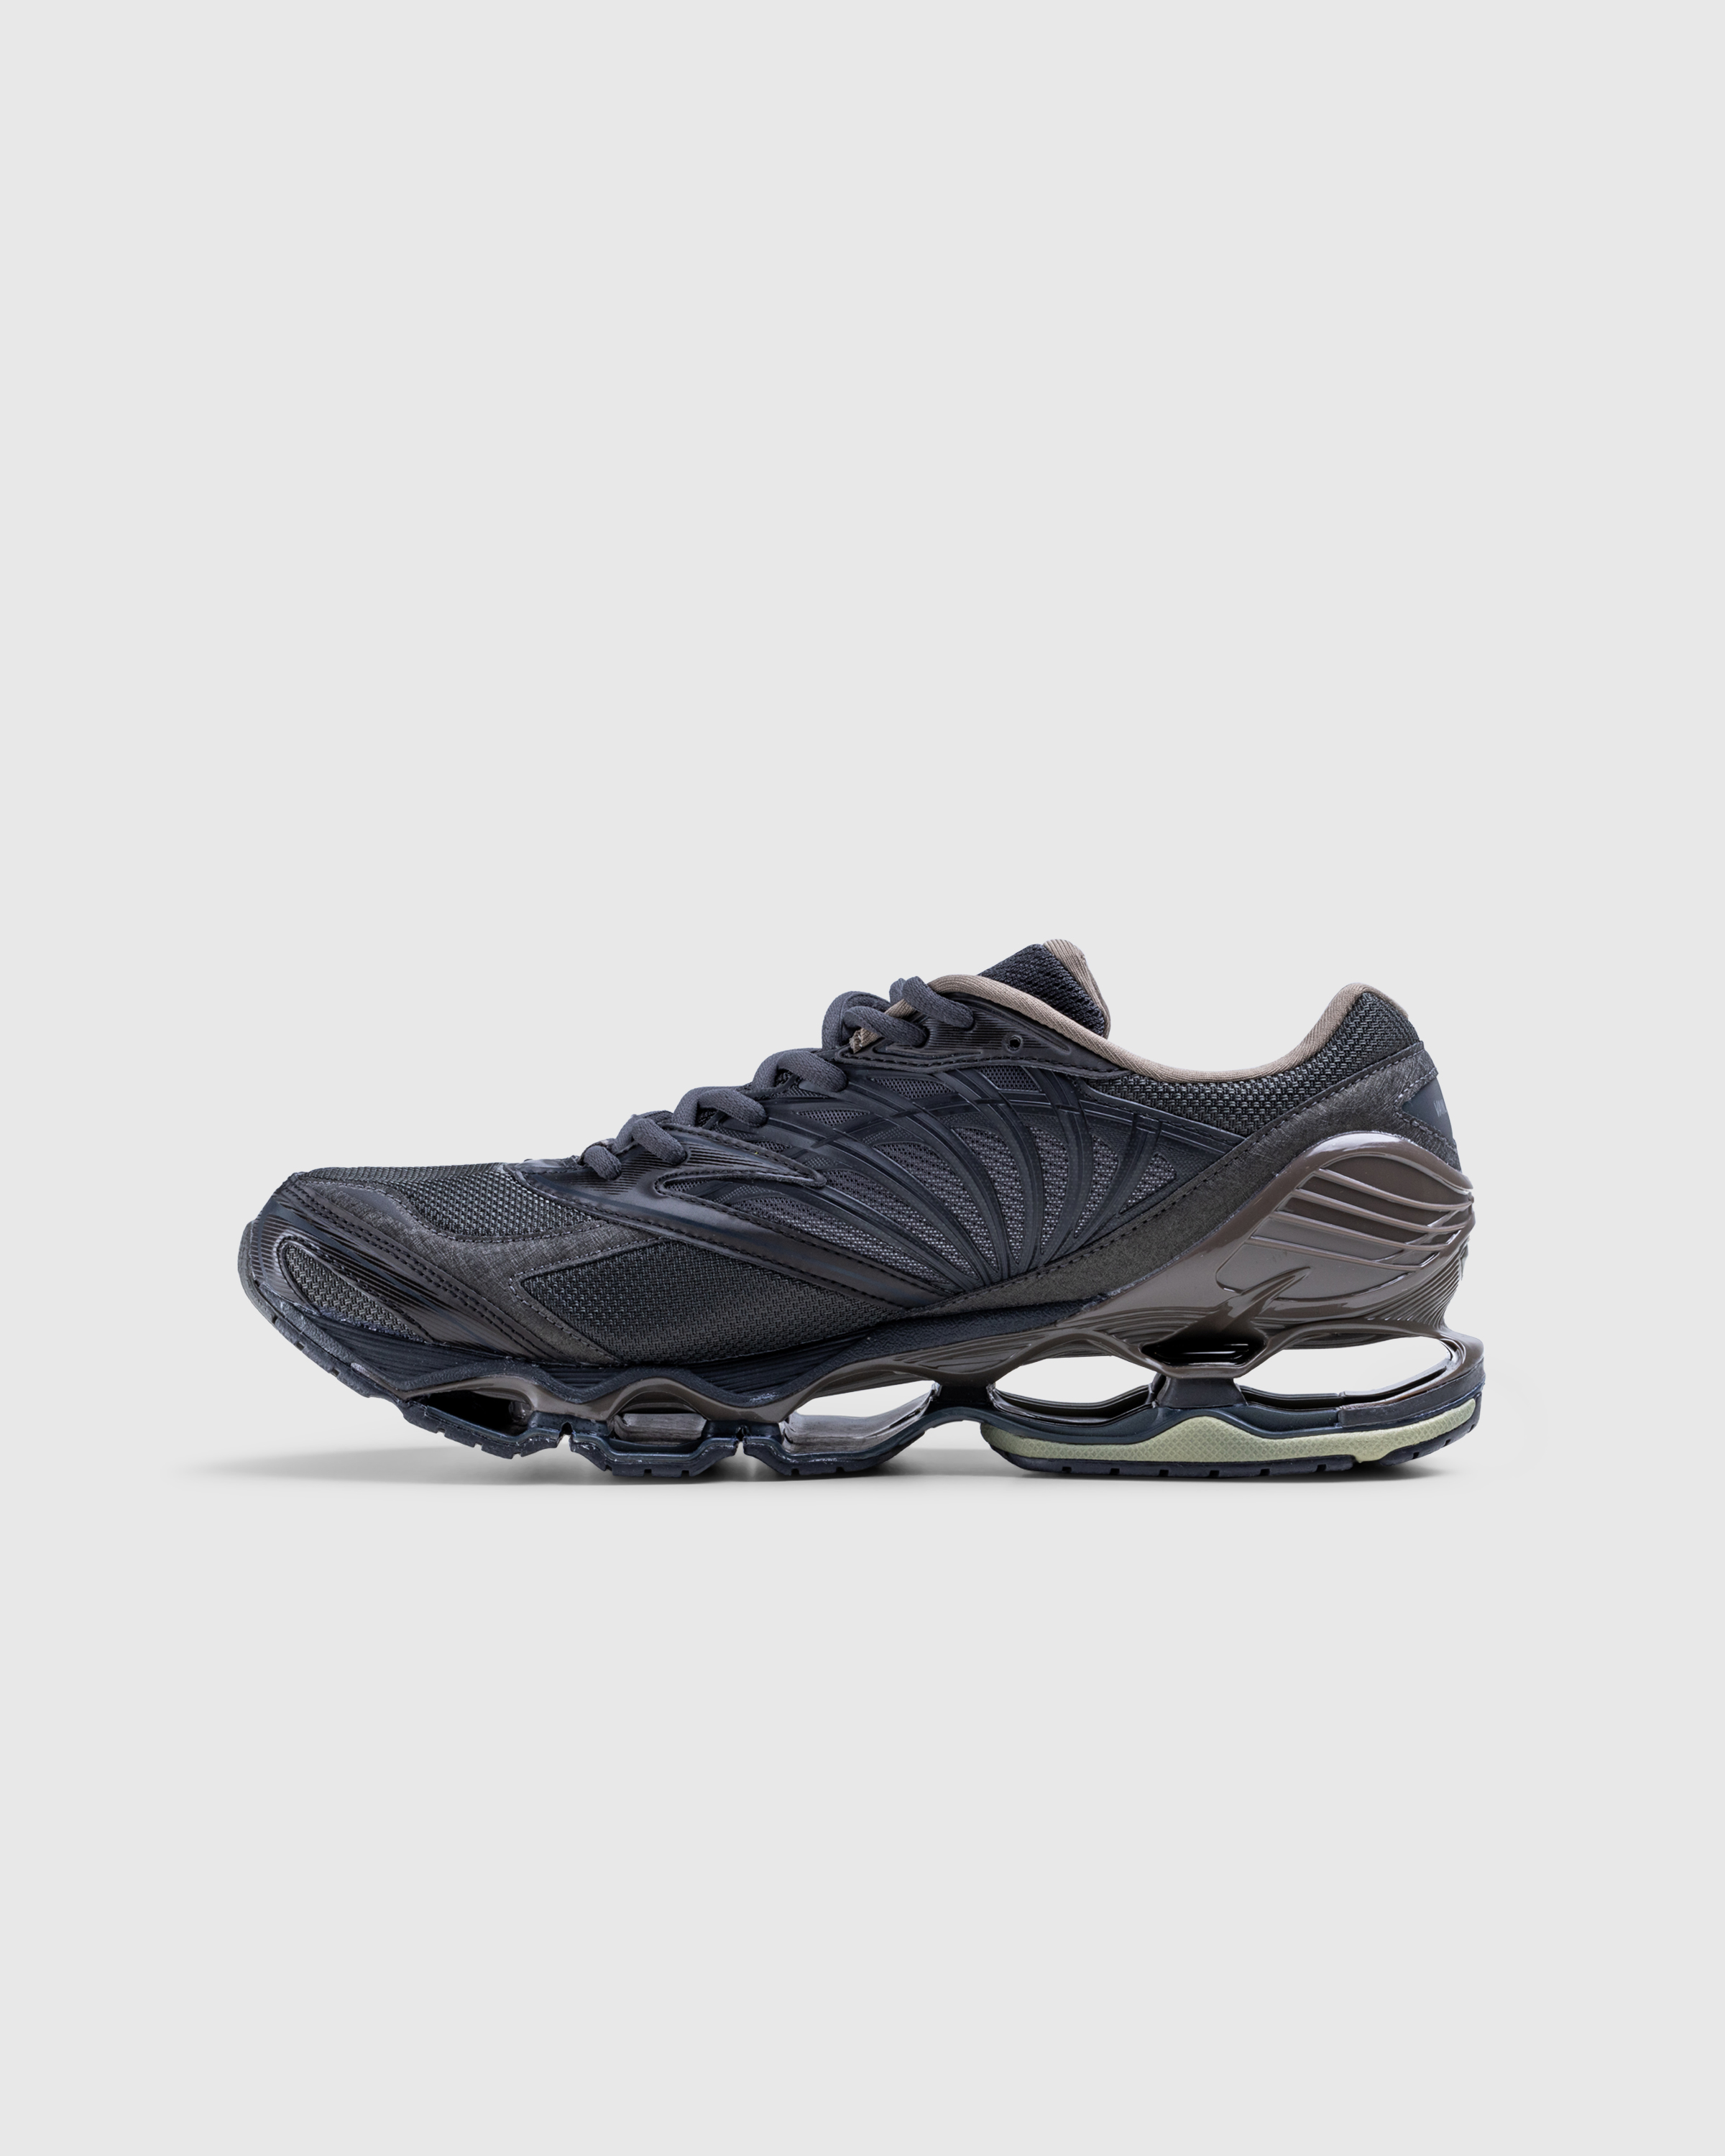 Mizuno – Wave Prophecy LS VAINL ARCHIVE Pirate Black/Chocolate Brown - Low Top Sneakers - Black - Image 2